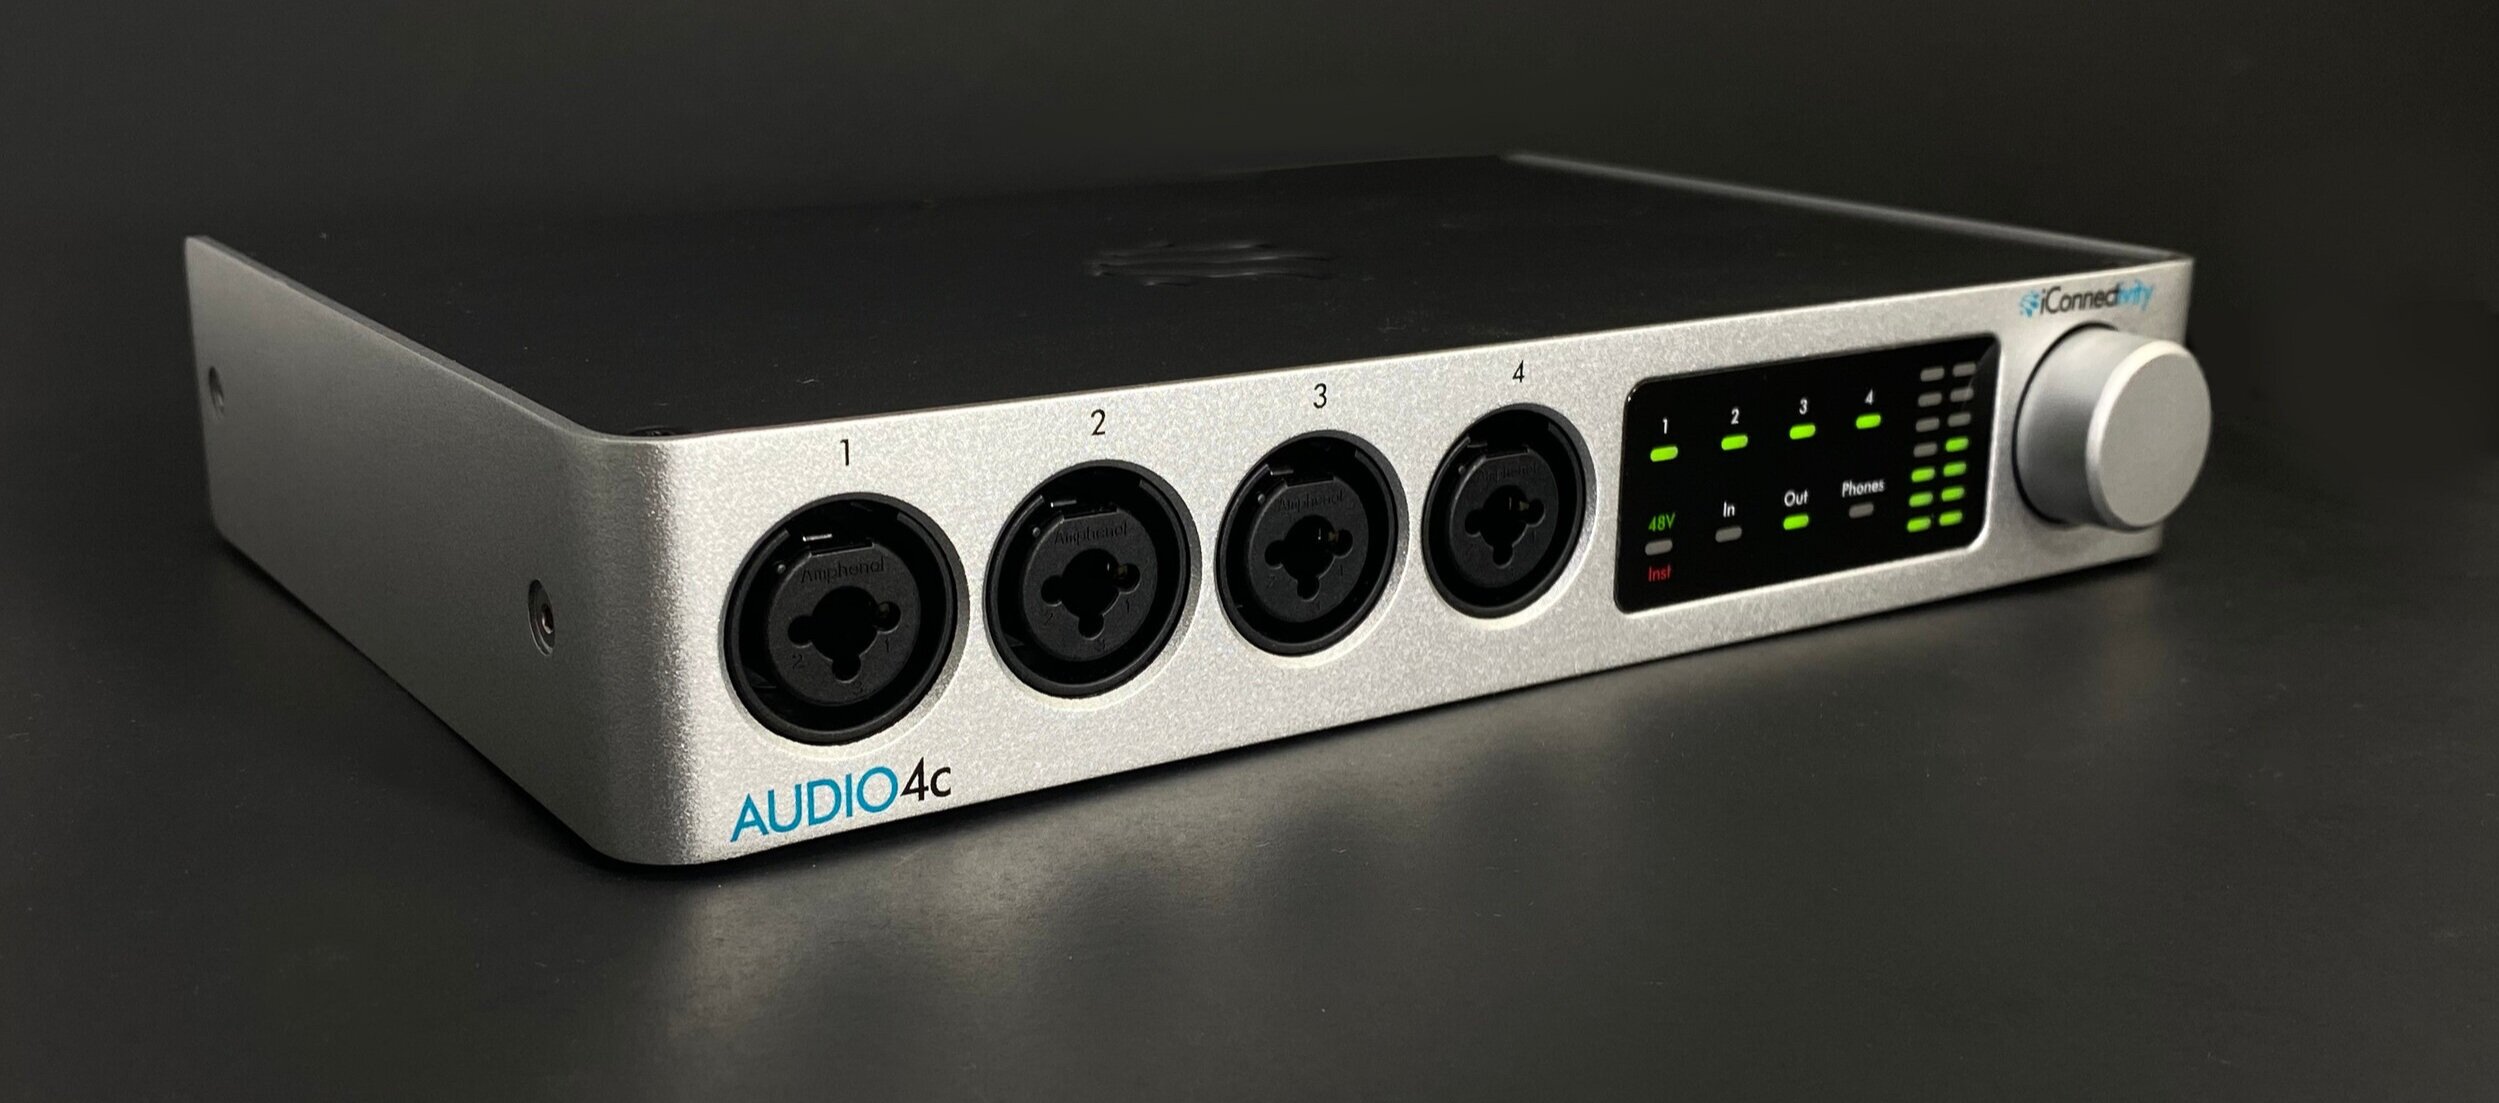 AUDIO4c - audio interface for streaming, performance, and